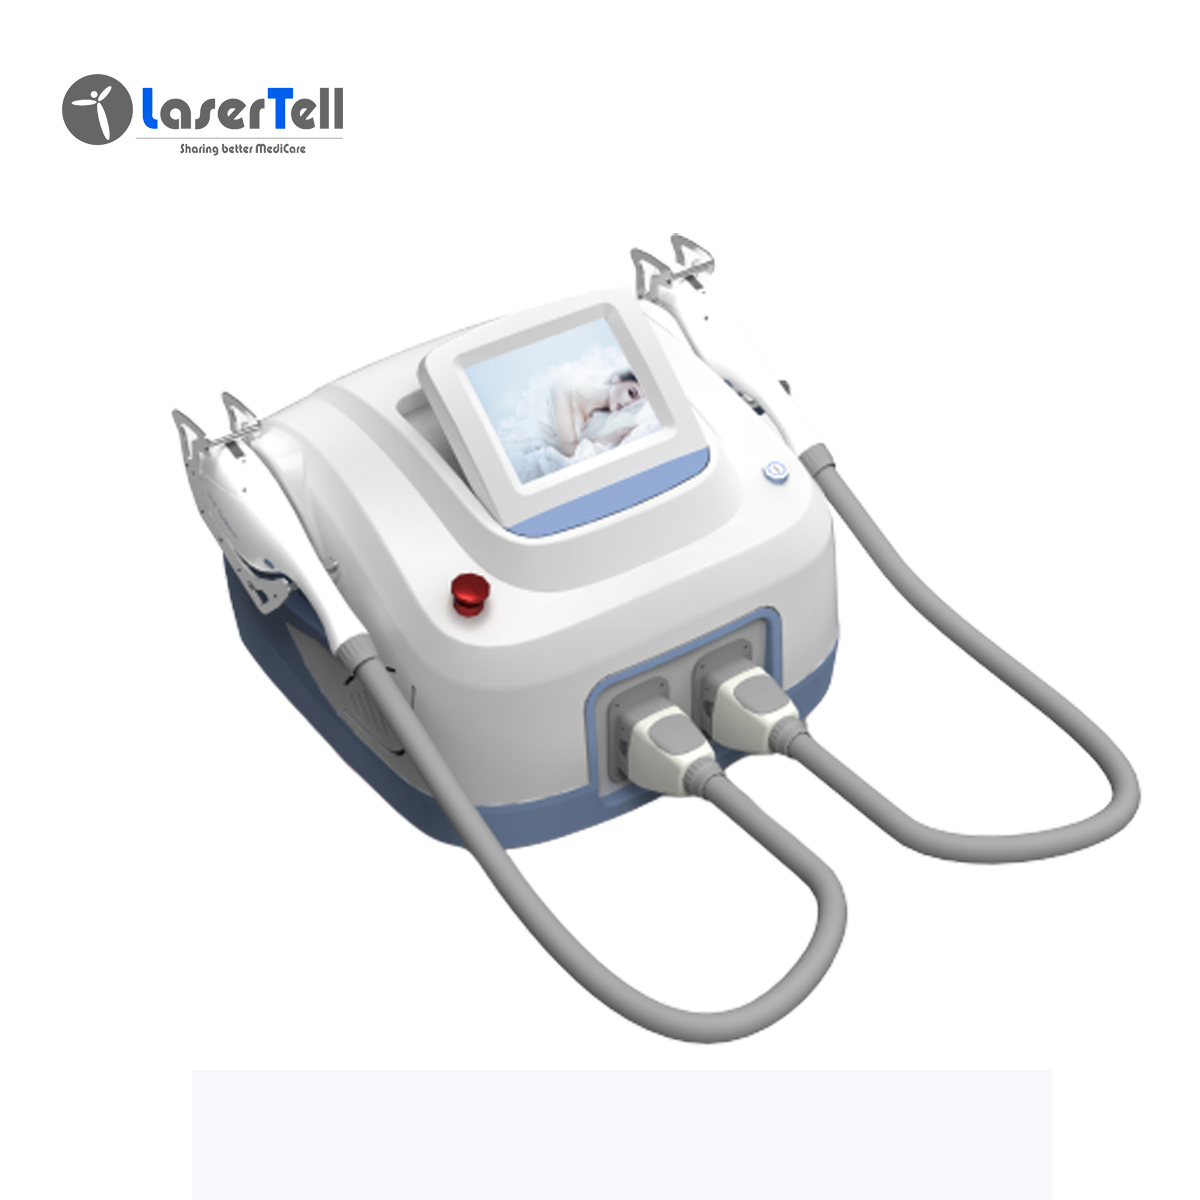 Portable opt ipl hair removal laser machine with 7 filters promotion price